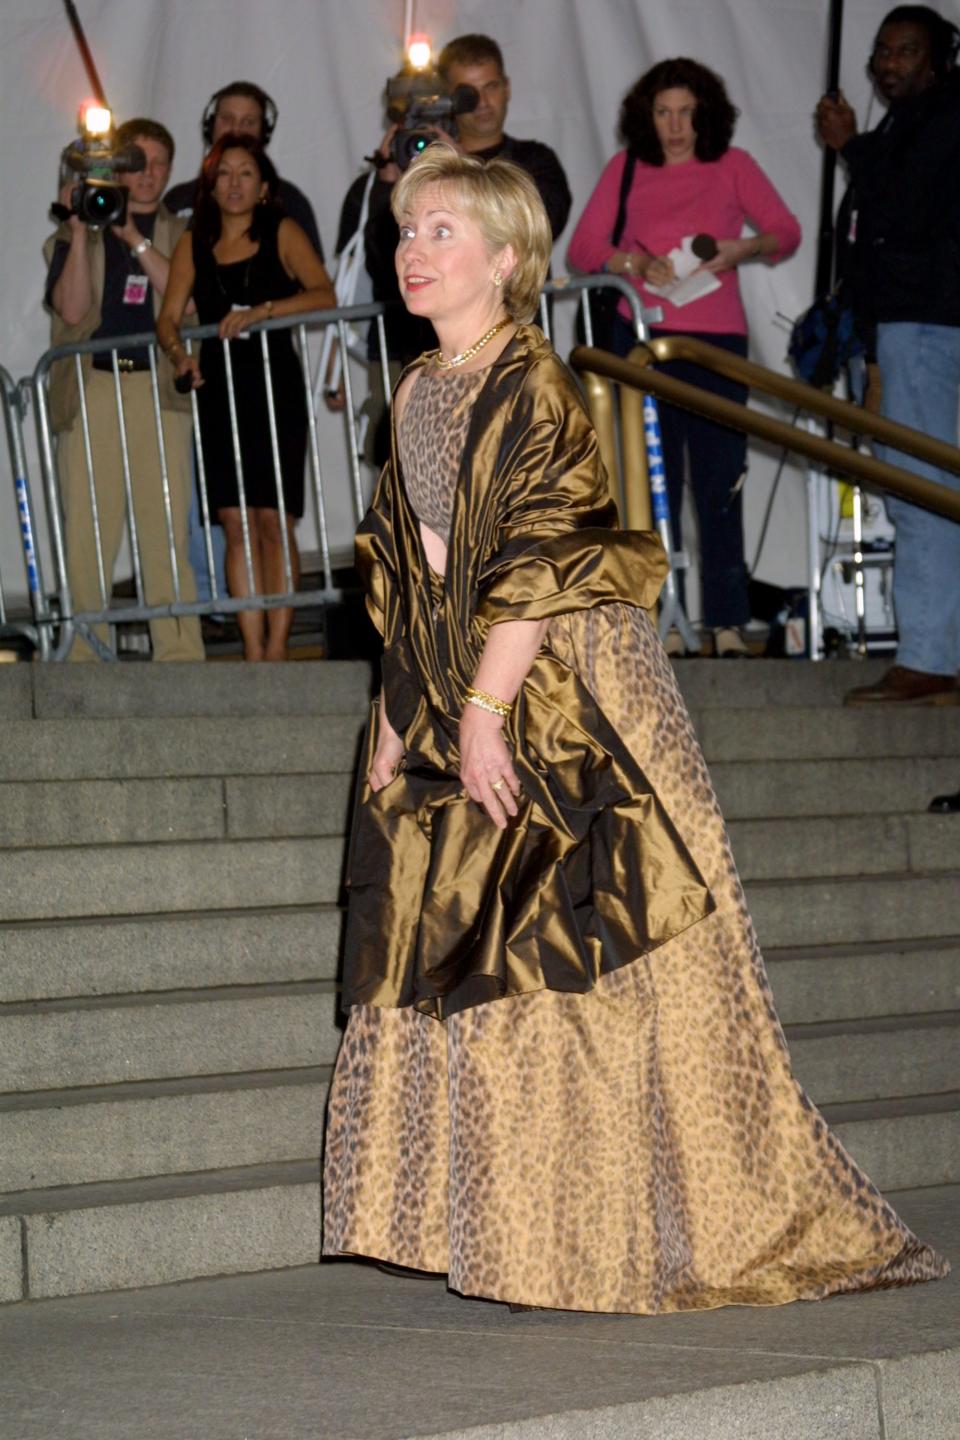 Hillary Clinton at the Costume Institute Gala to celebrate the clothes of Jacqueline Kennedy.